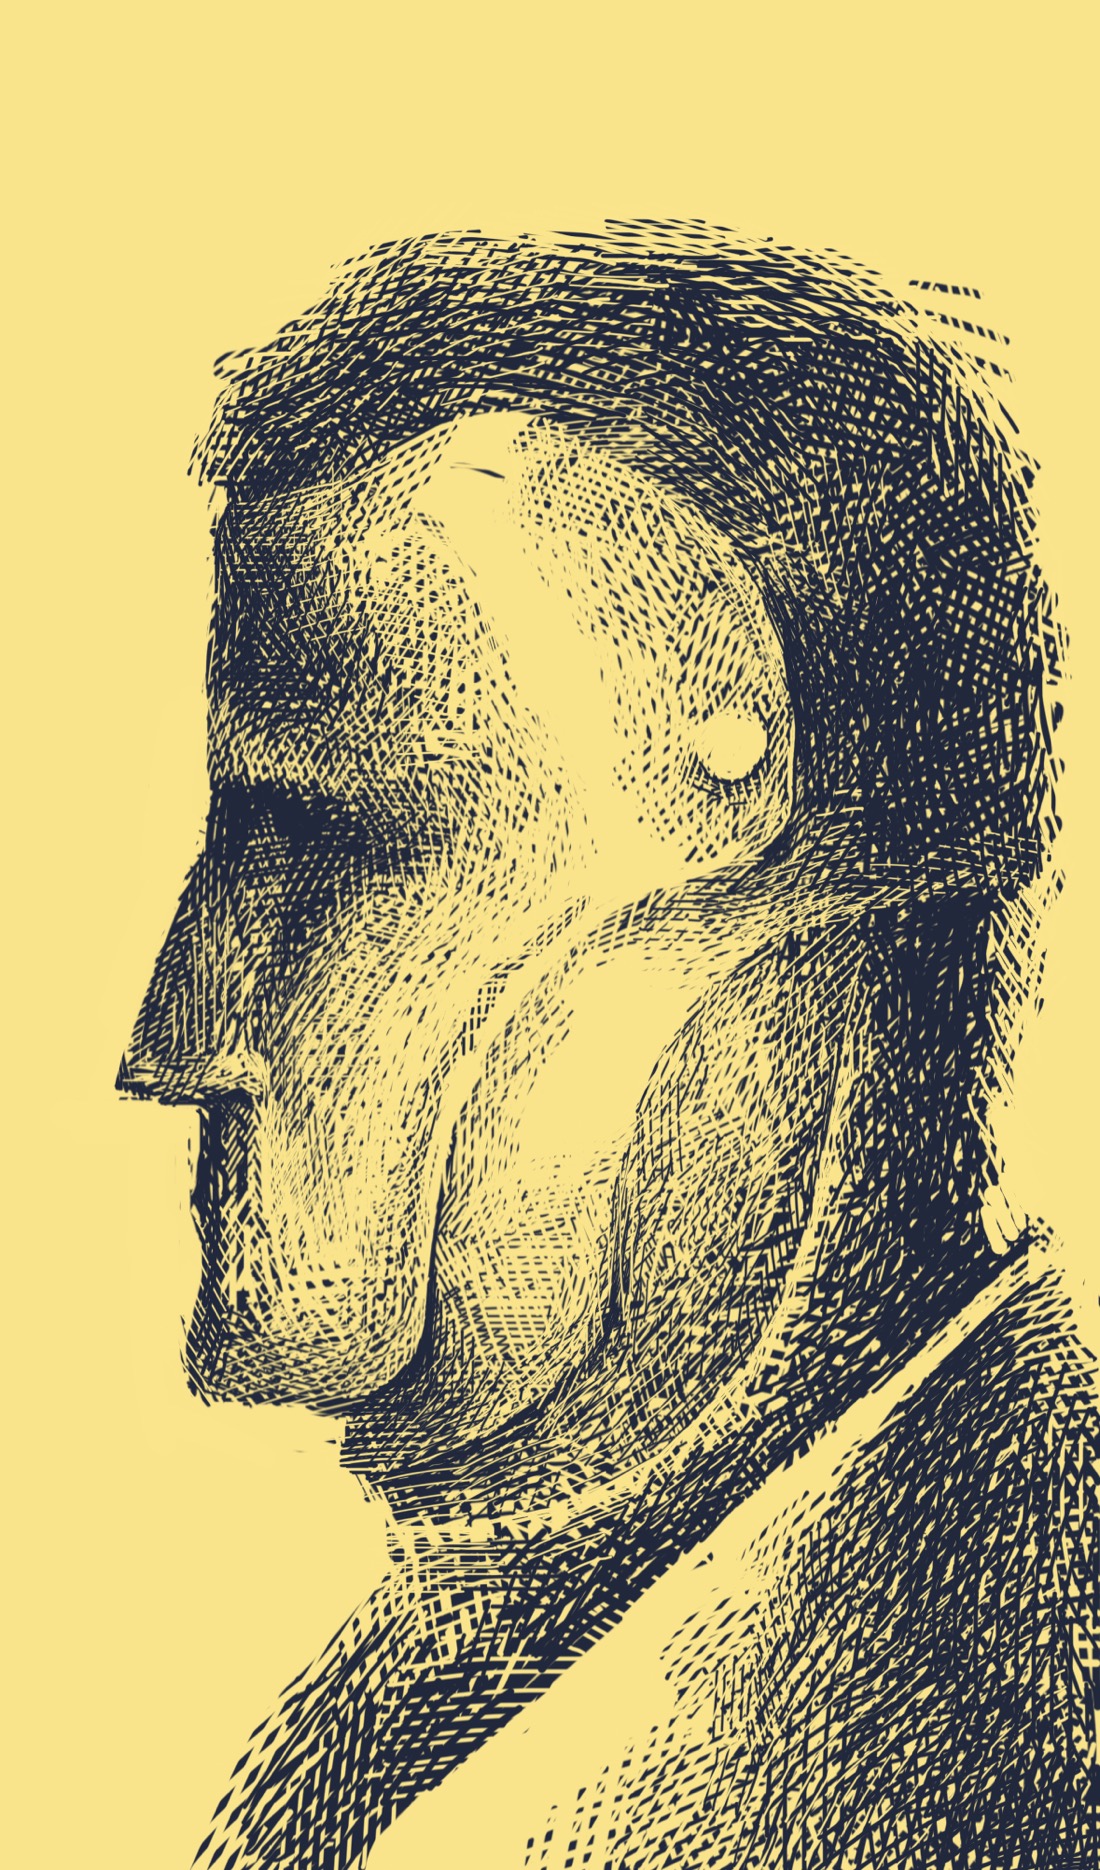 A face in profile, with a blur of short, dark hair. The face is sterile, minimalist, and expressionless, like that of a mannequin. It appears to be a mask, but other lines and seams make it look as though the entire head is assembled of multiple parts, as if the entire figure in the drawing is a machine or robot of some sort.